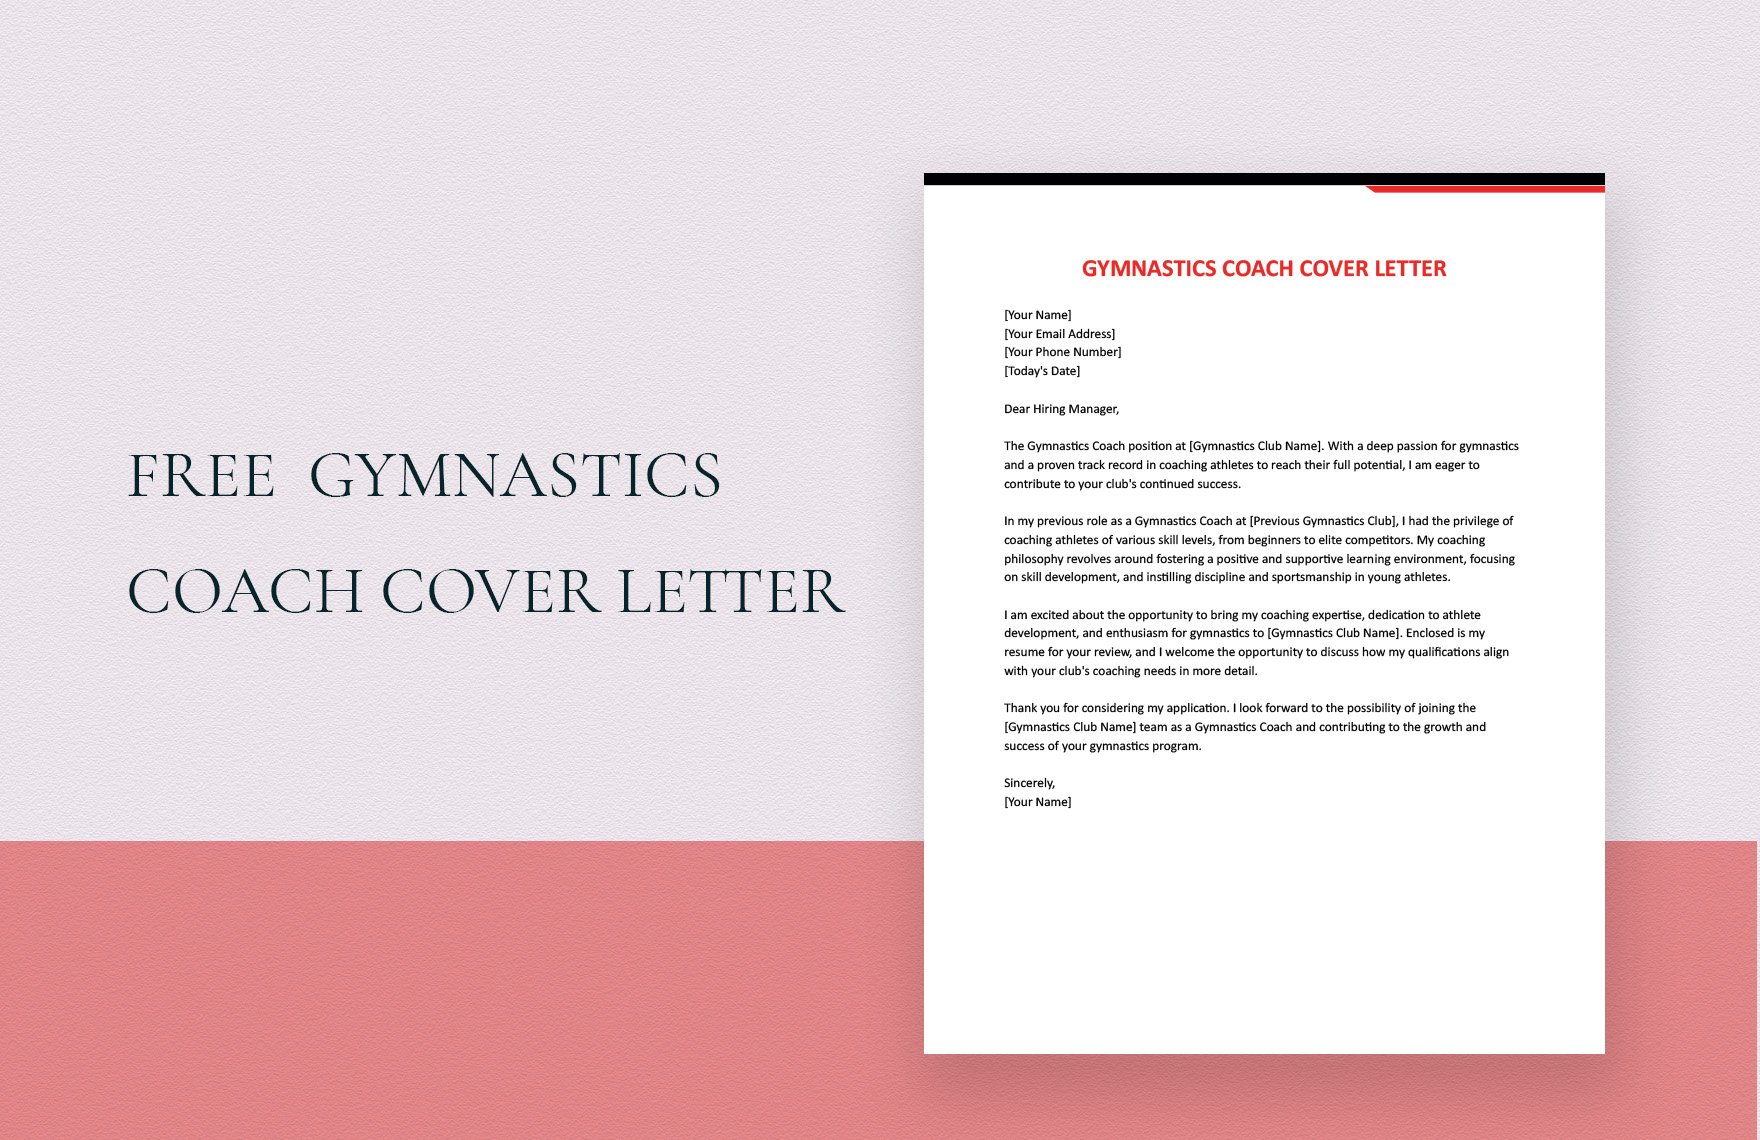 Gymnastics Coach Cover Letter in Word, Google Docs